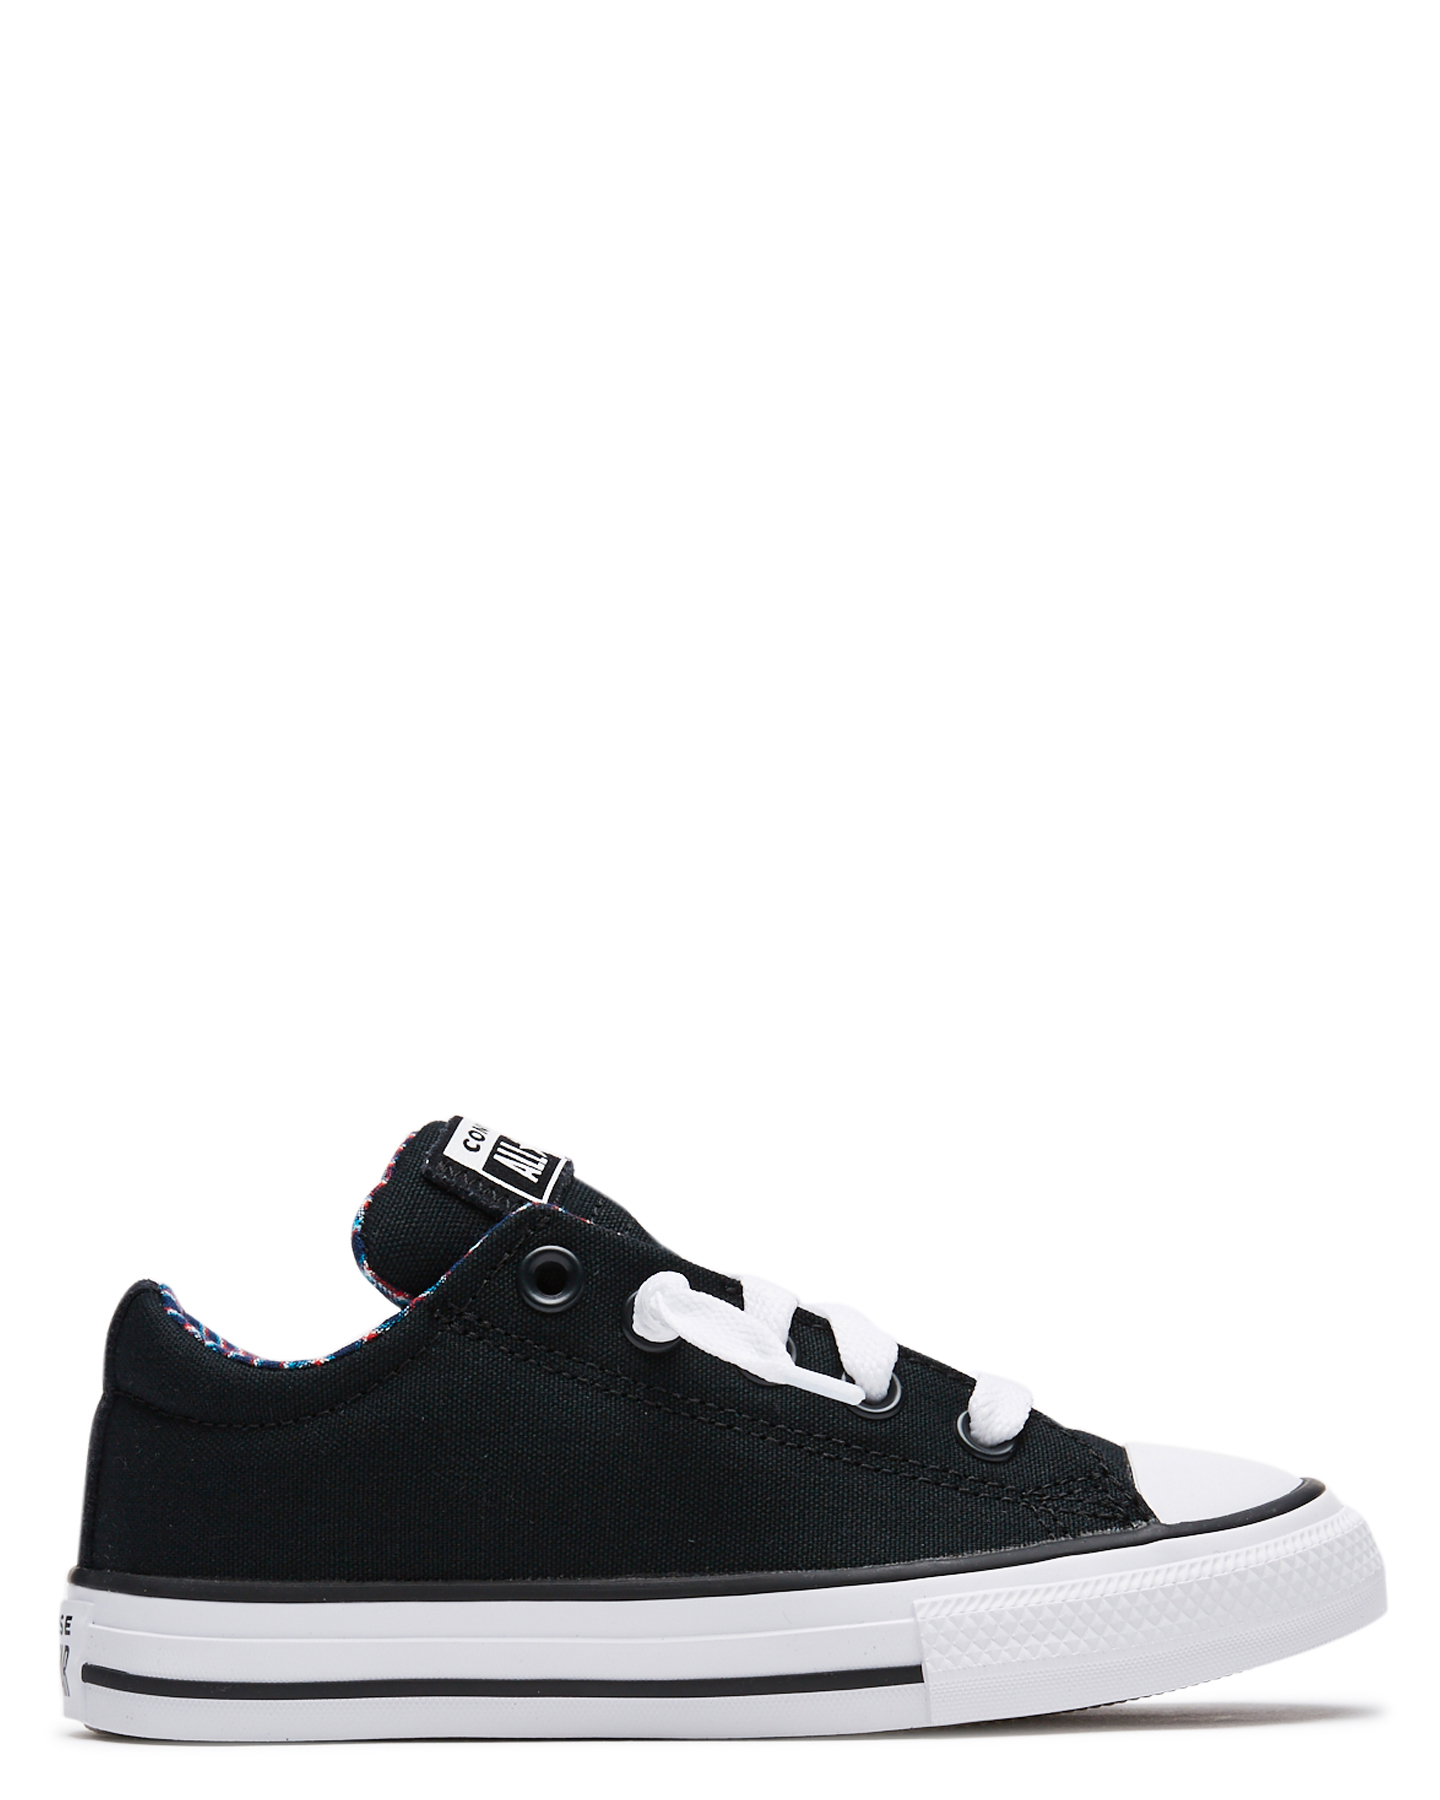 converse youth slip on